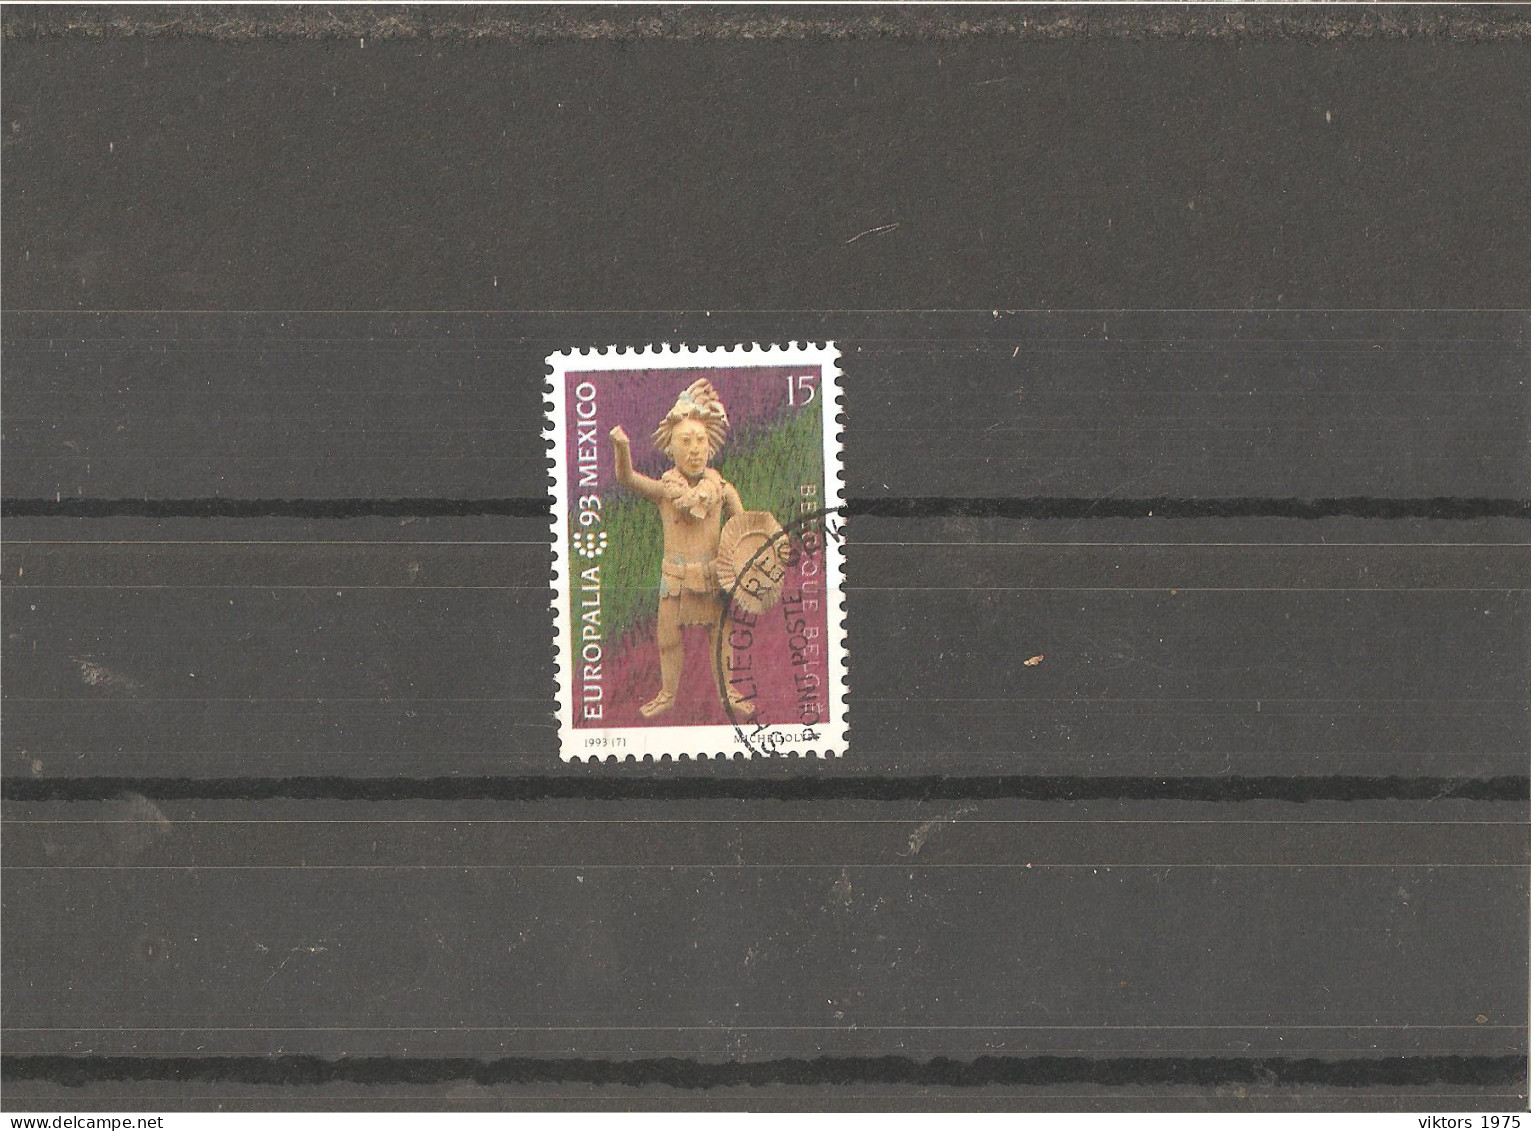 Used Stamp Nr.2560 In MICHEL Catalog - Used Stamps